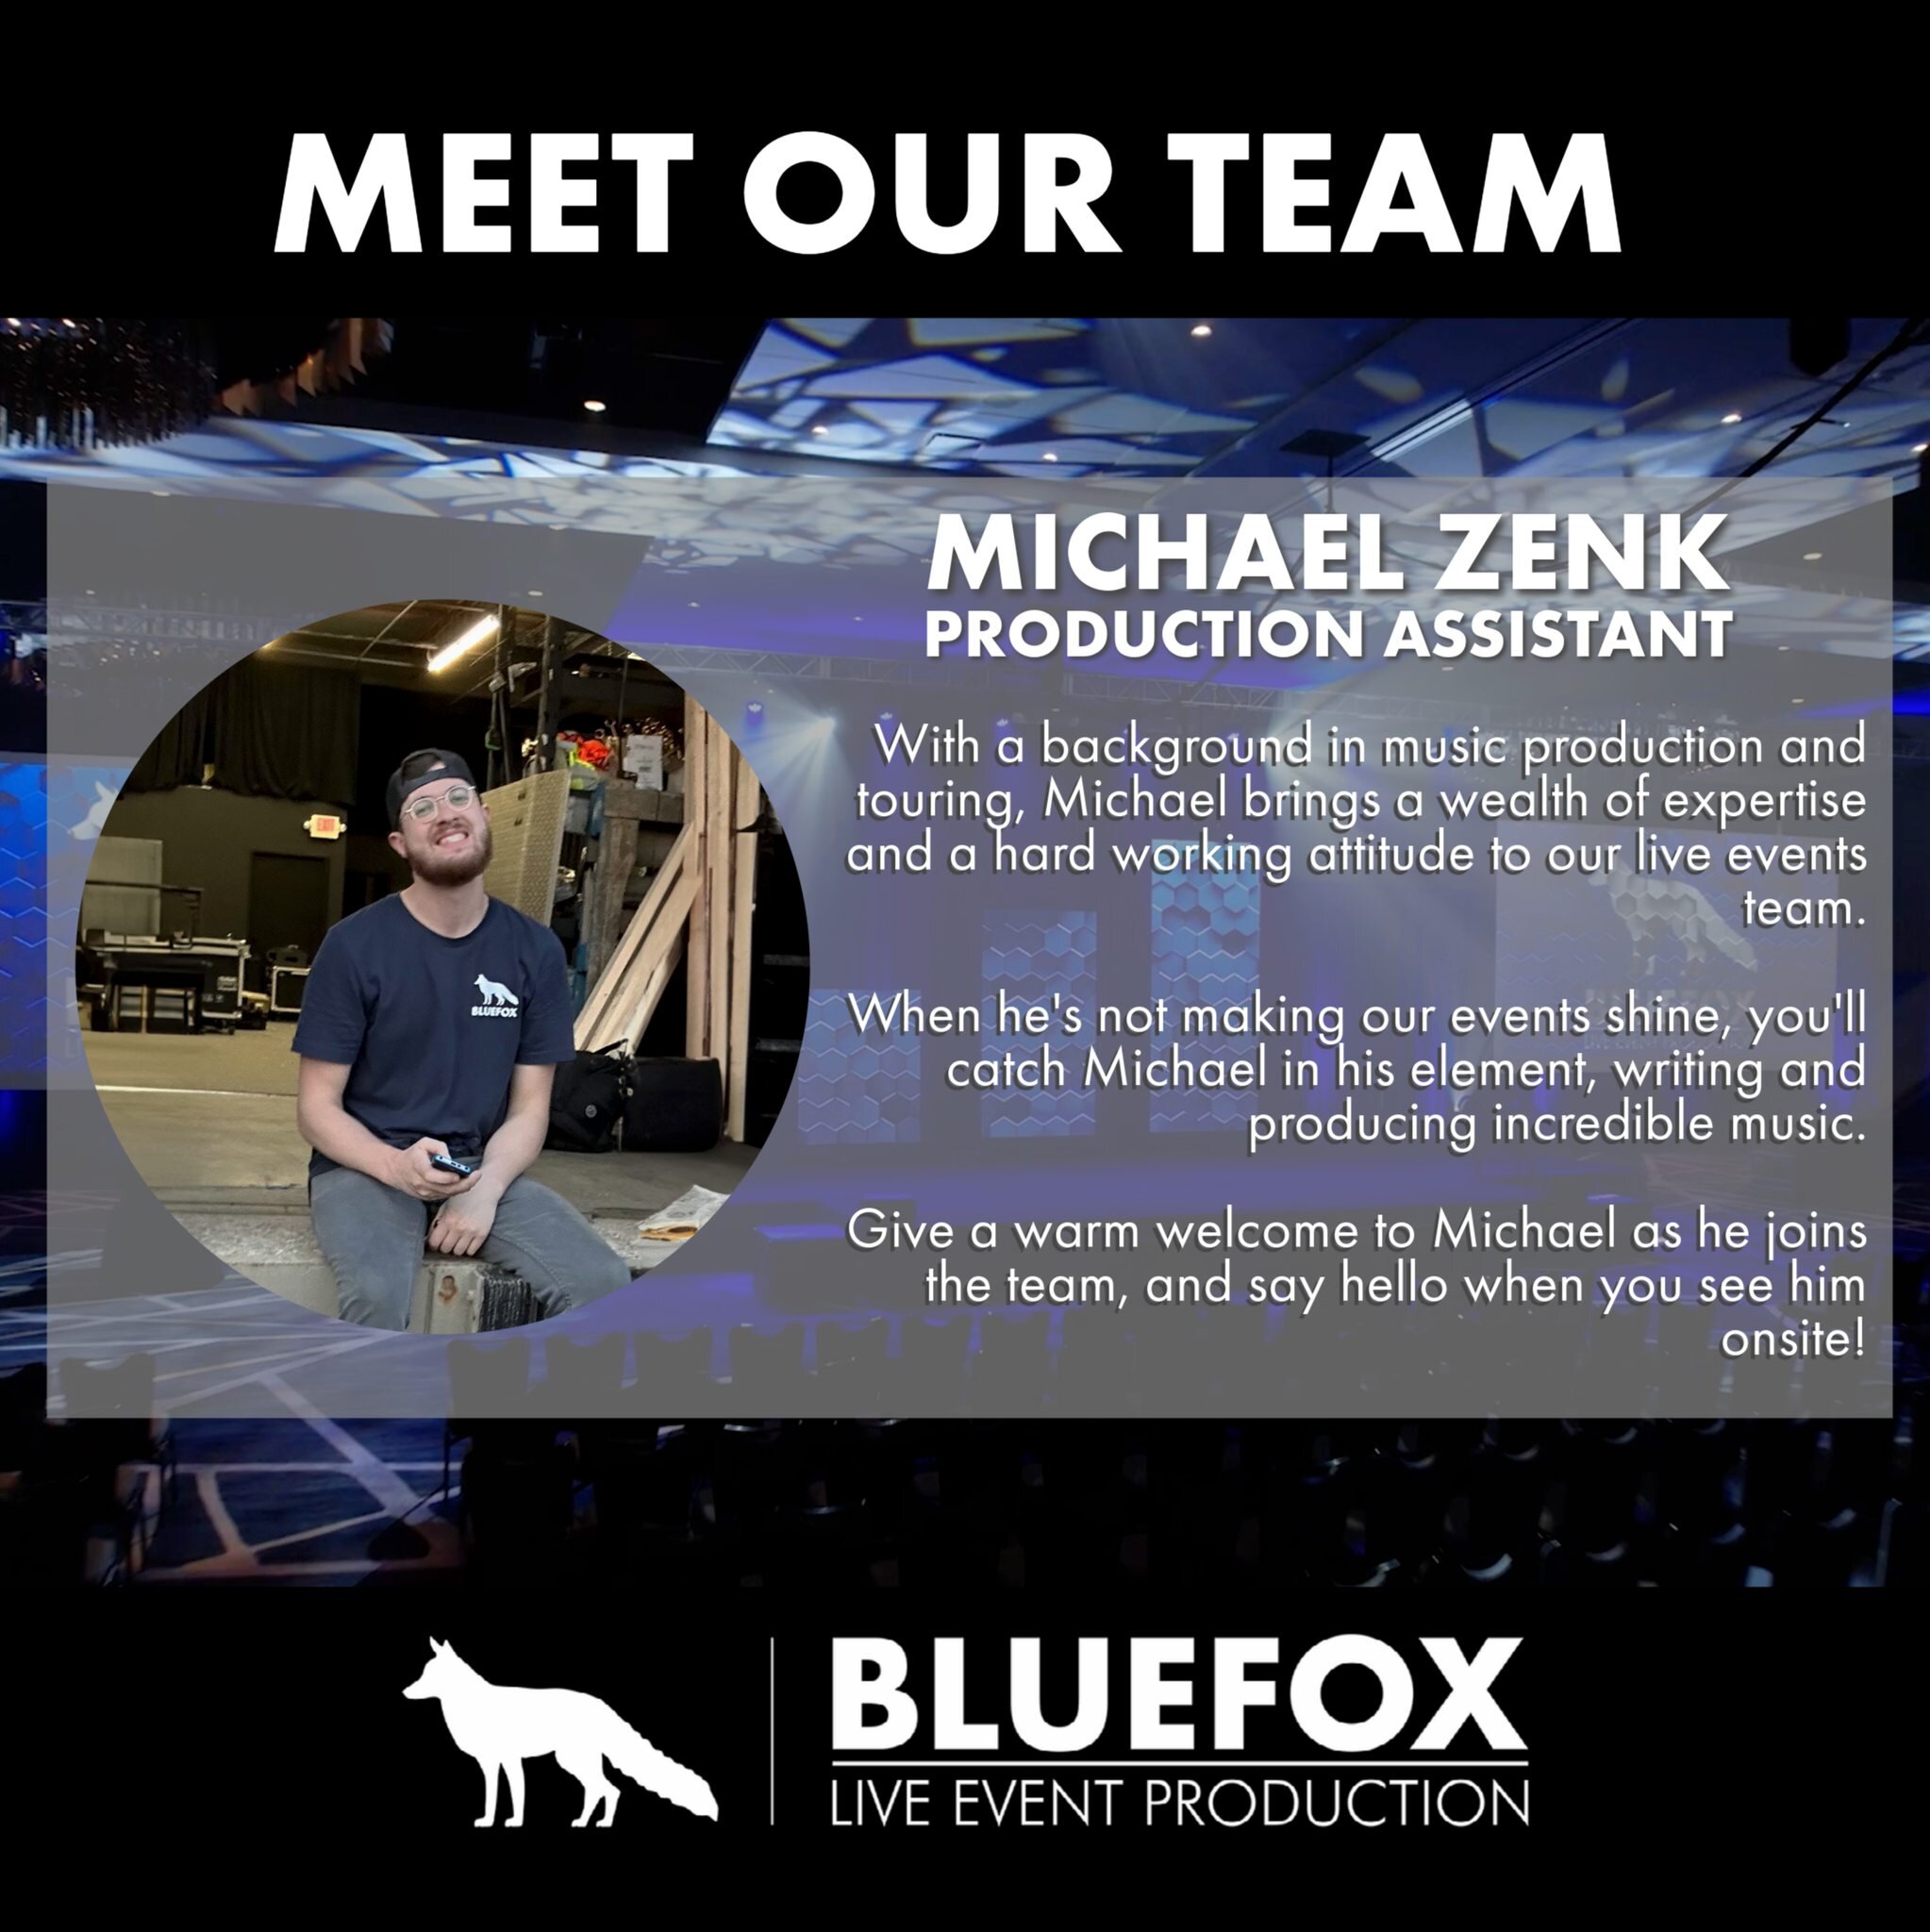 Q3 has been a blip in time for Bluefox. We're thrilled to share all the exciting developments at our company! 

As we head into the final quarter of the year, we're proud to announce that our team is growing stronger than ever. 

We've welcomed some 